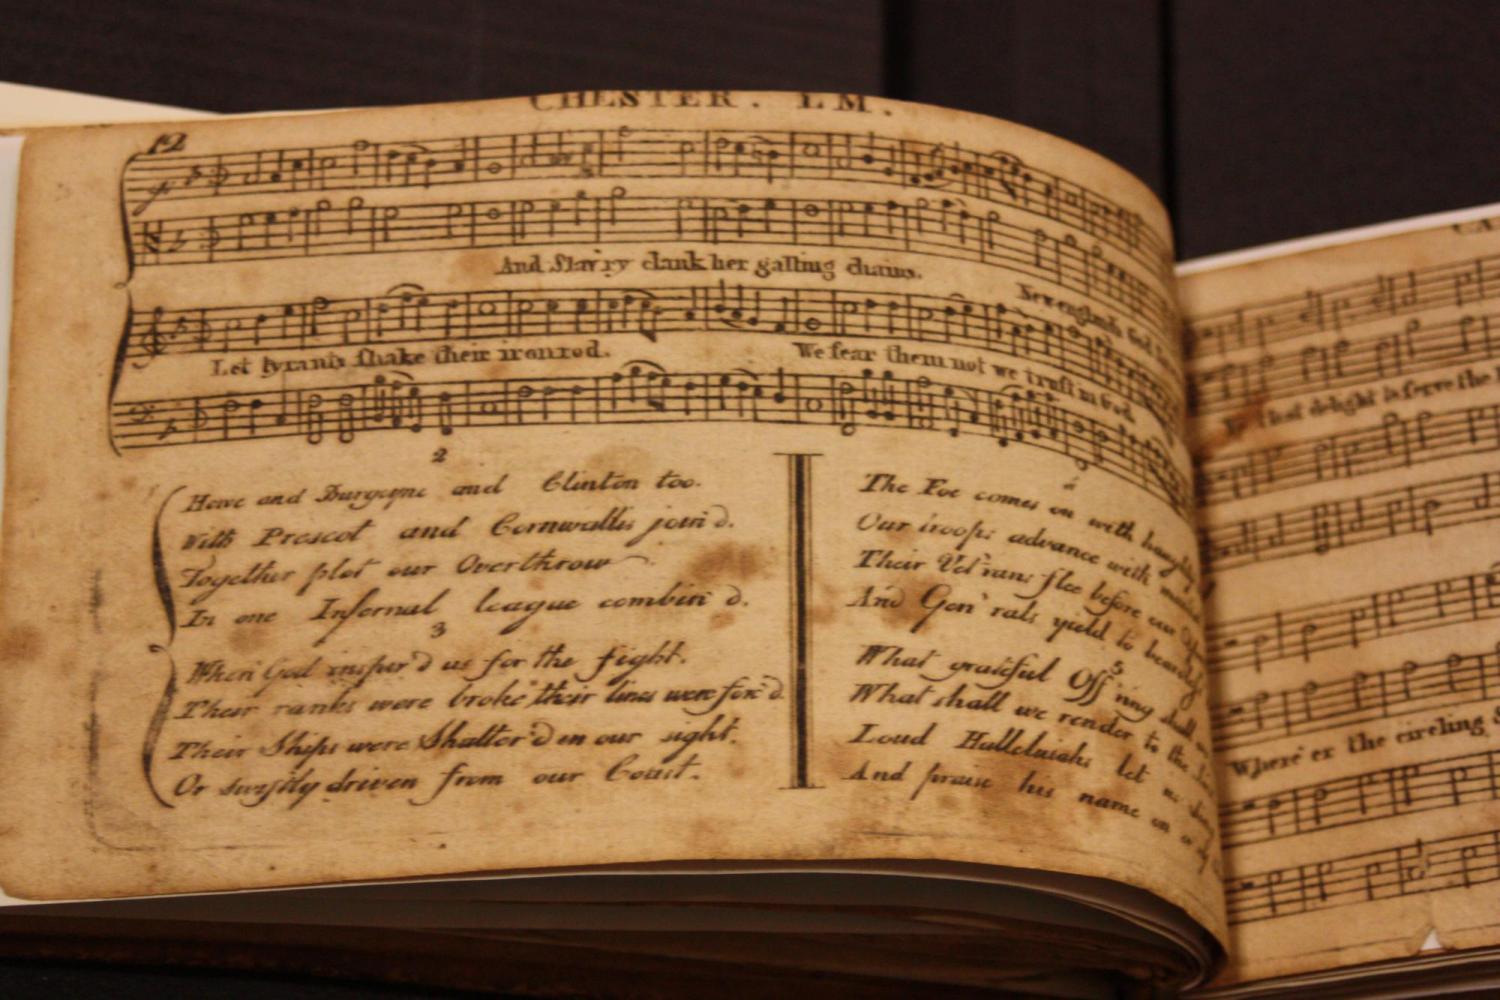 Song book from the AMRC collection